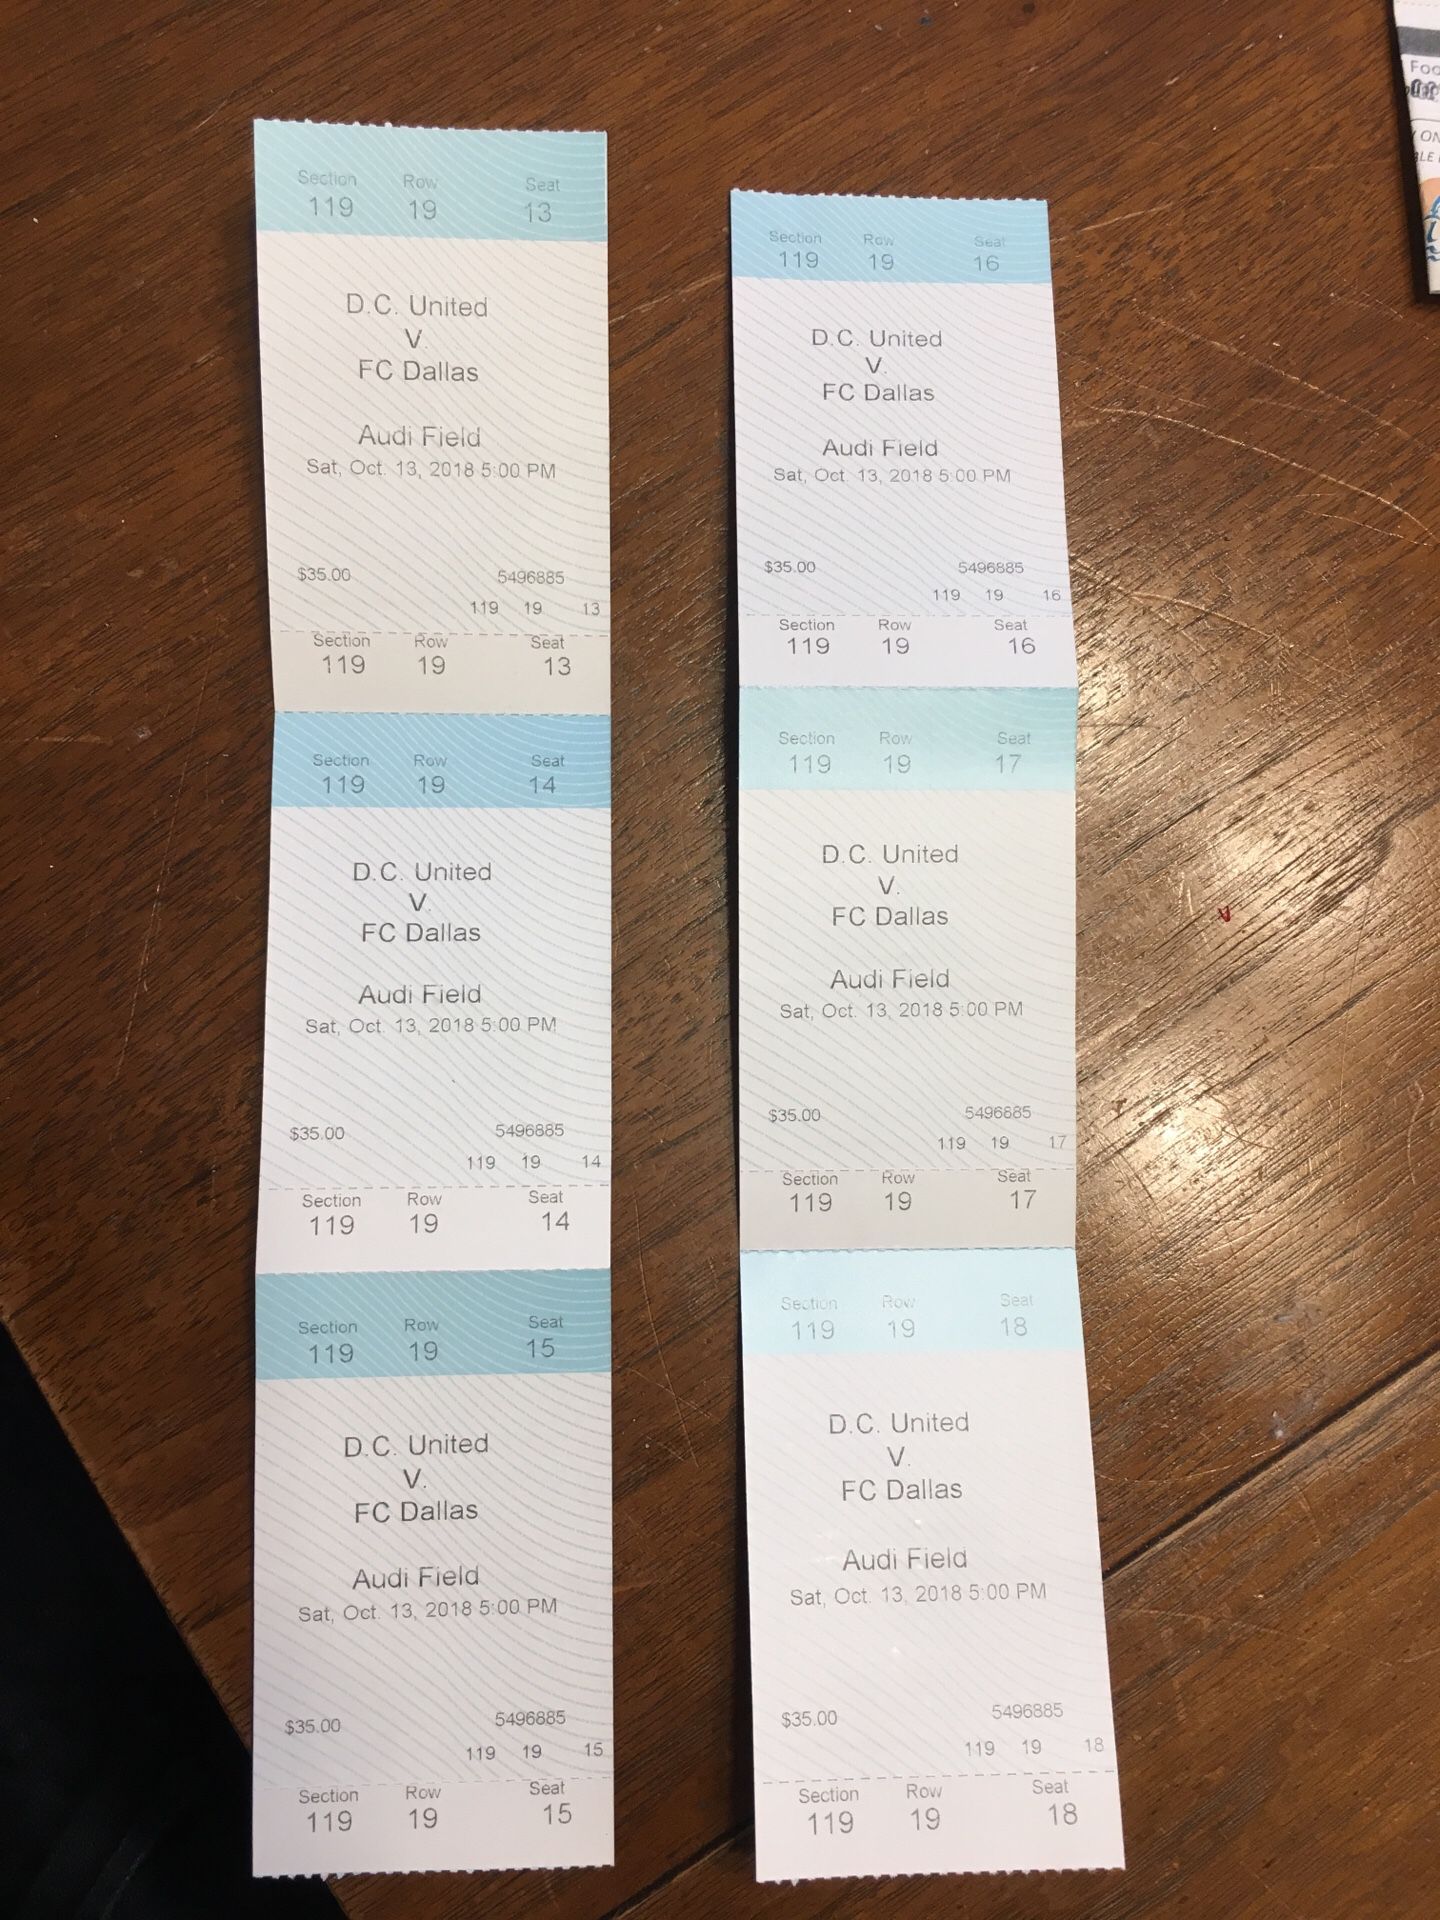 8 Tickets for D.C United v. FC Dallas